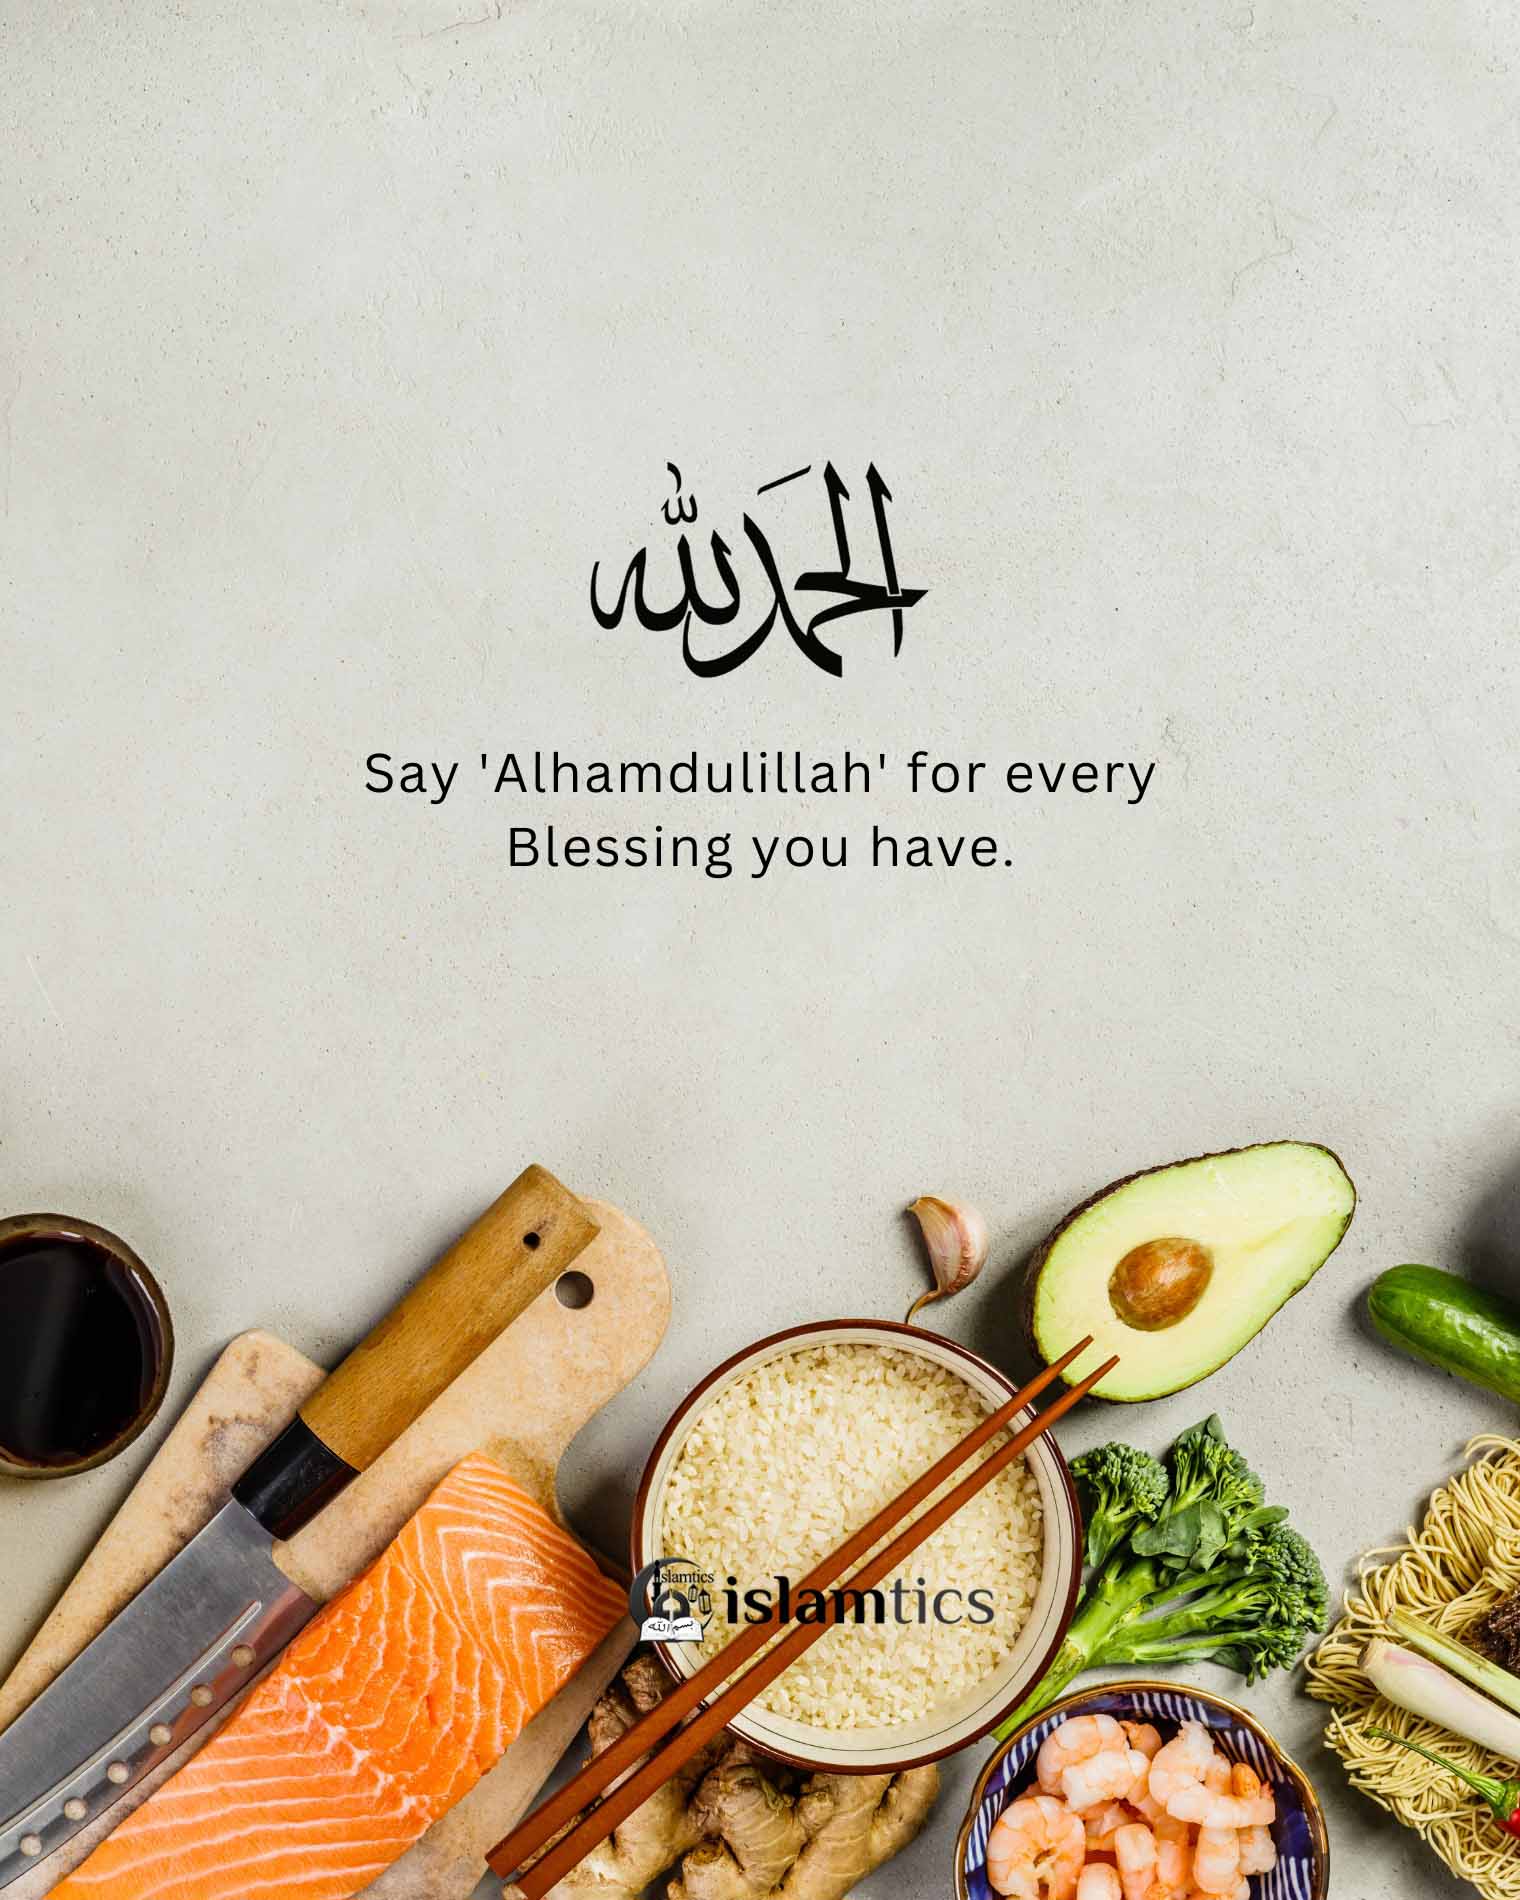  Say ‘Alhamdulillah’ for every Blessing you have.